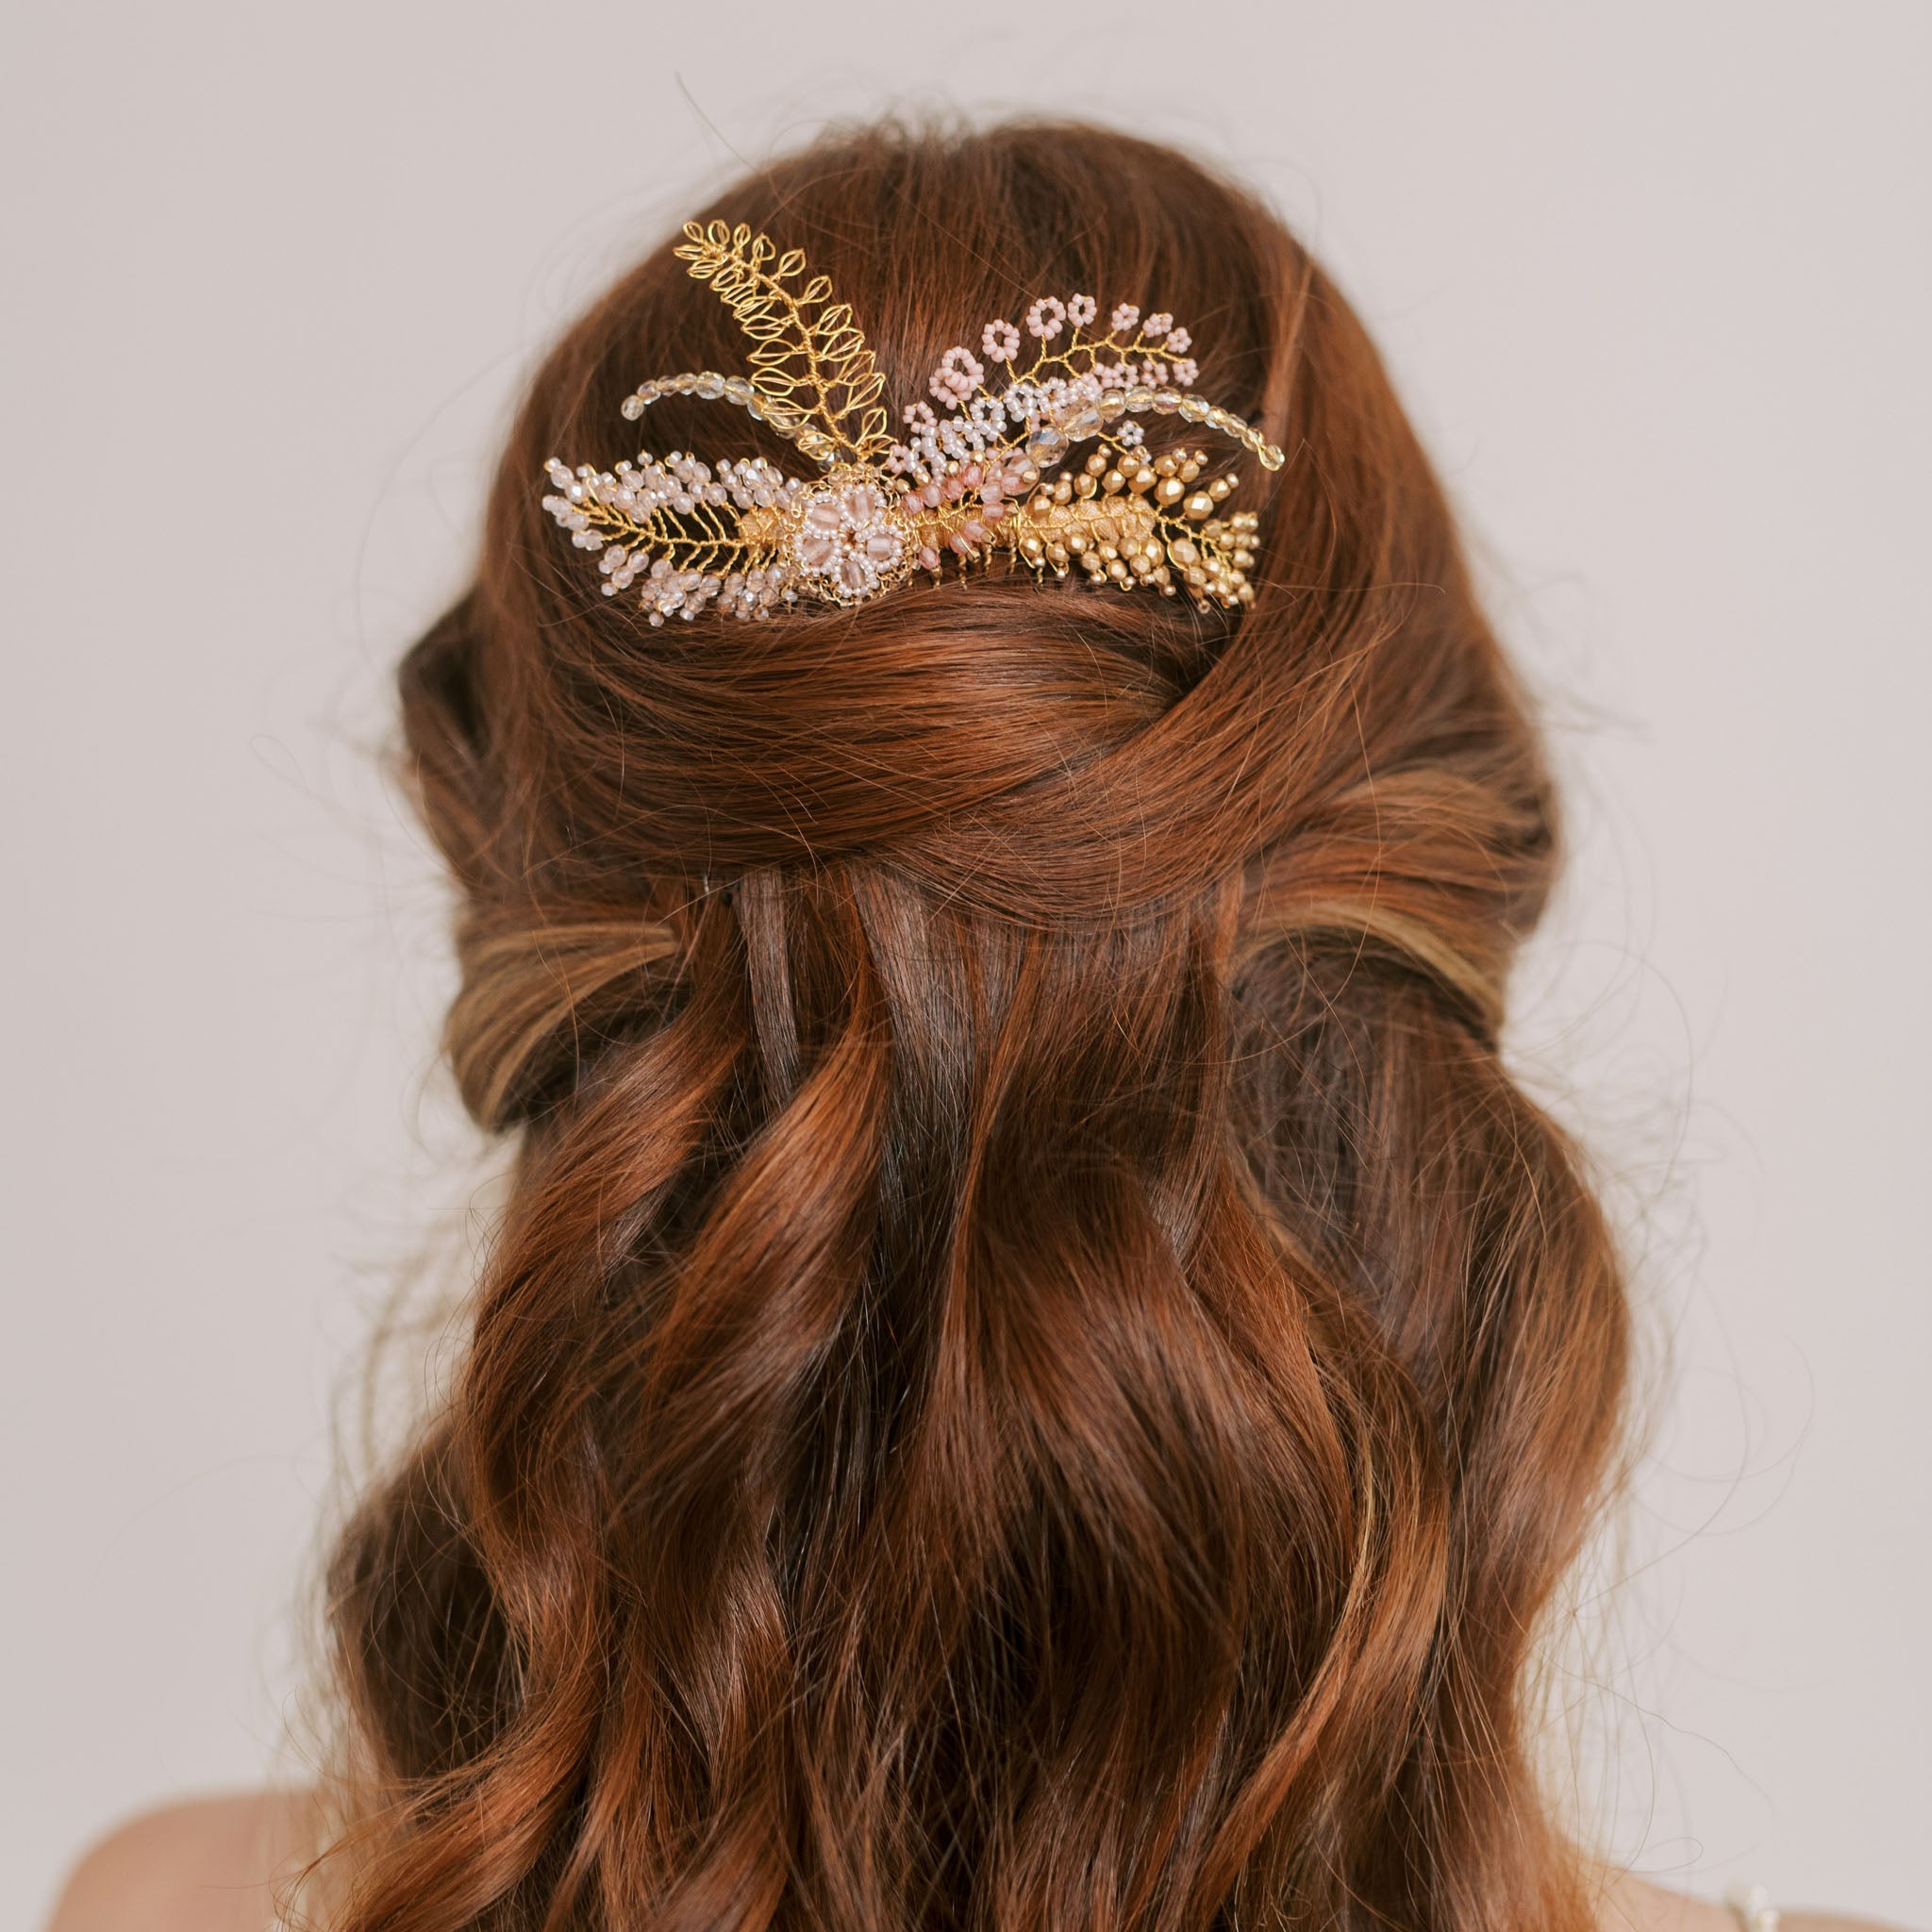 Bridal hair comb inspired by wildflowers and leaves by Judith Brown Bridal